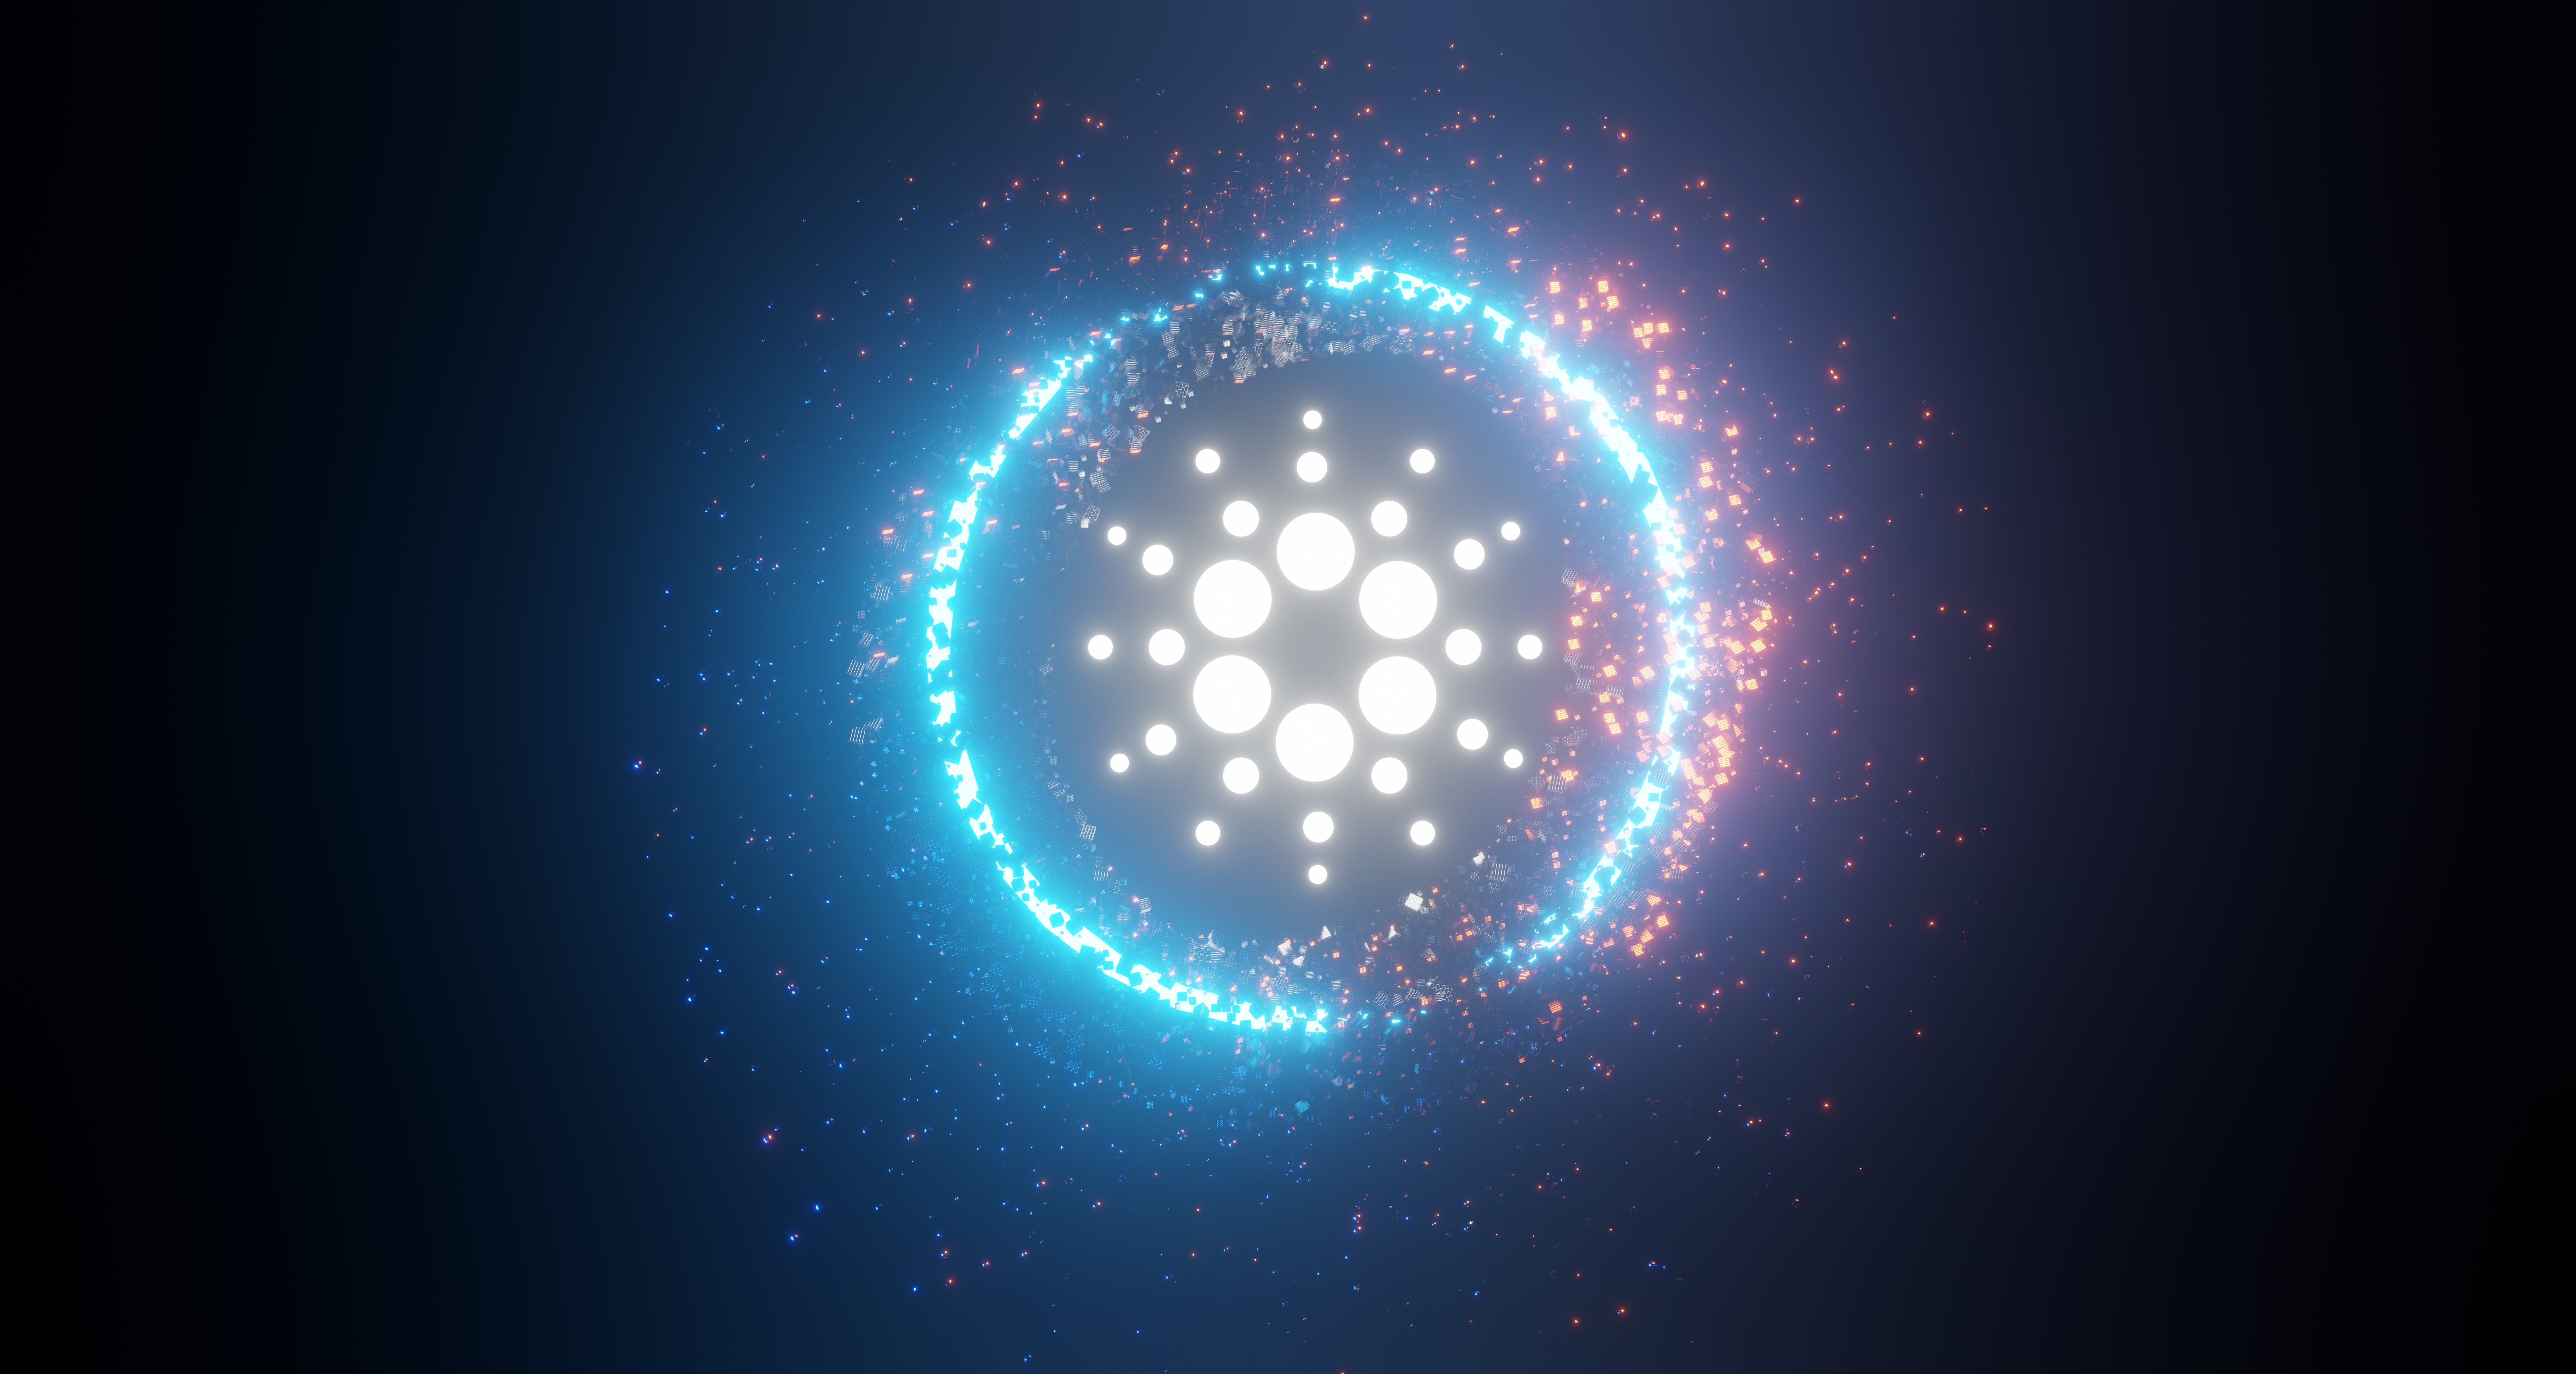 Top-Trader Picks Cardano As Bull Market Leader: Here's Why